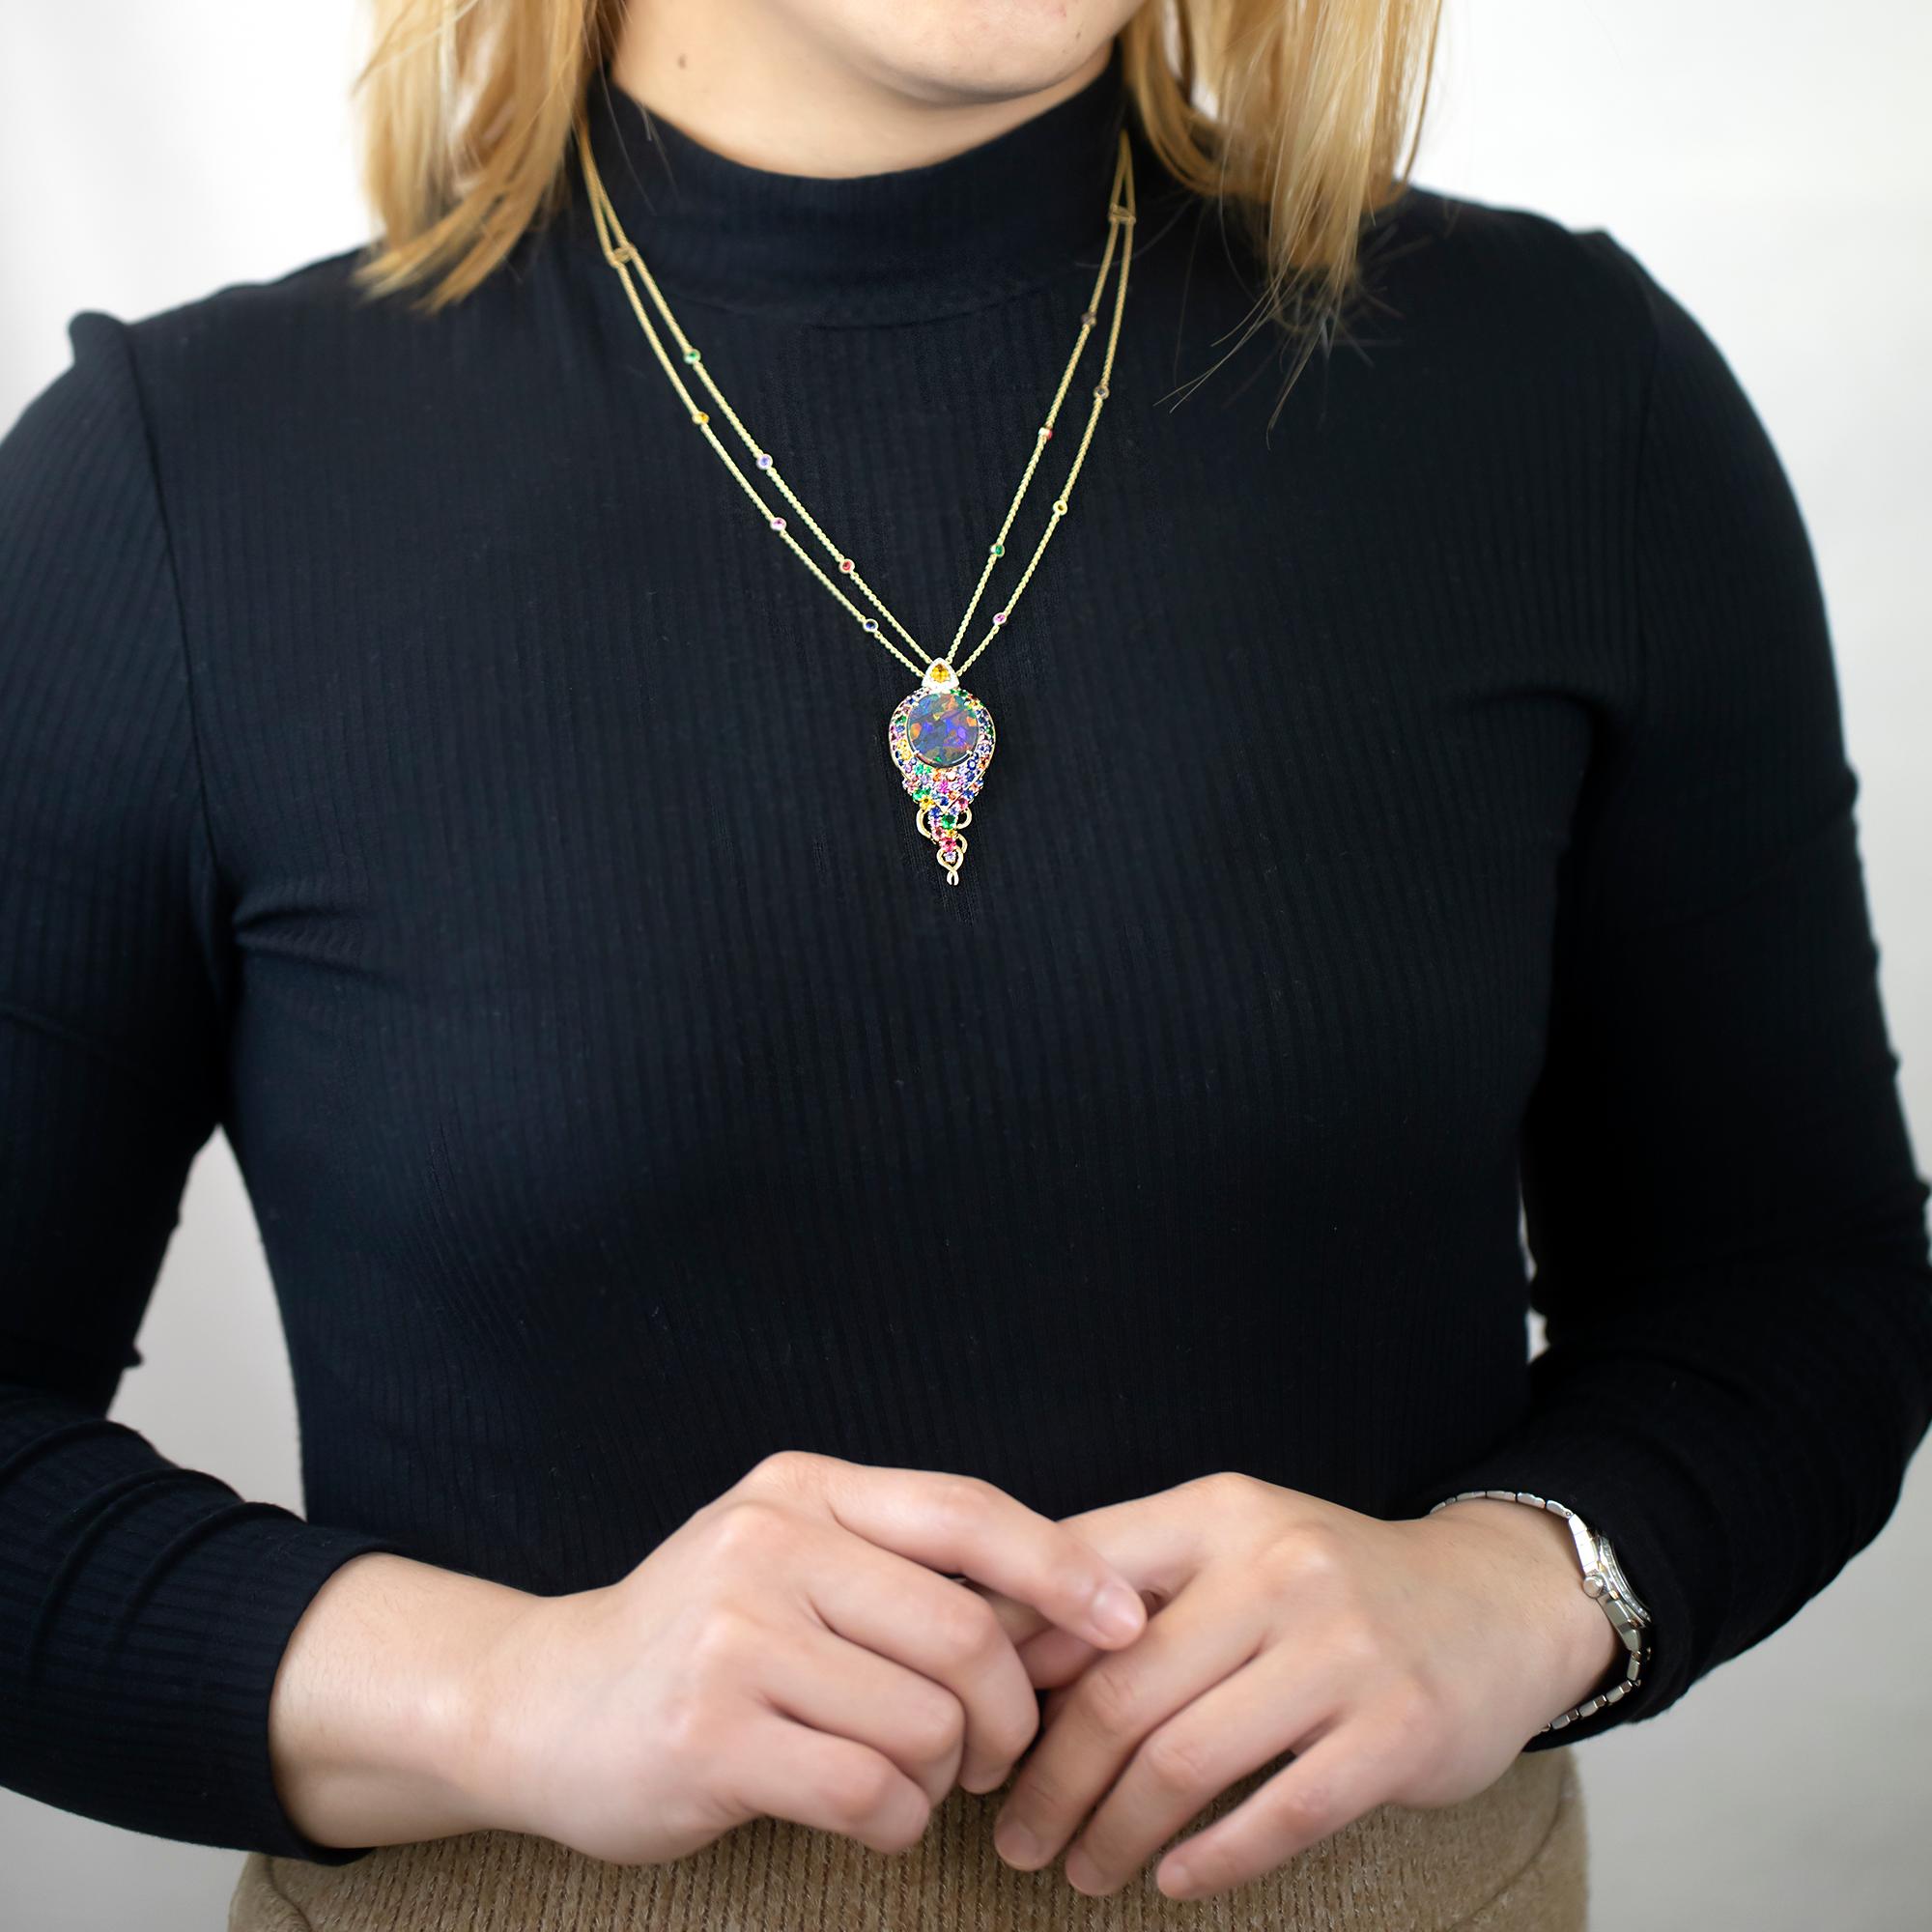 Australian opals are imbued with the magic of vibrant colour, which reaches into your soul and reflects the beauty of the world around us. The Gerard McCabe Lorikeet necklace features a Remarkable Lightning Ridge Opal with an exceptionally bright